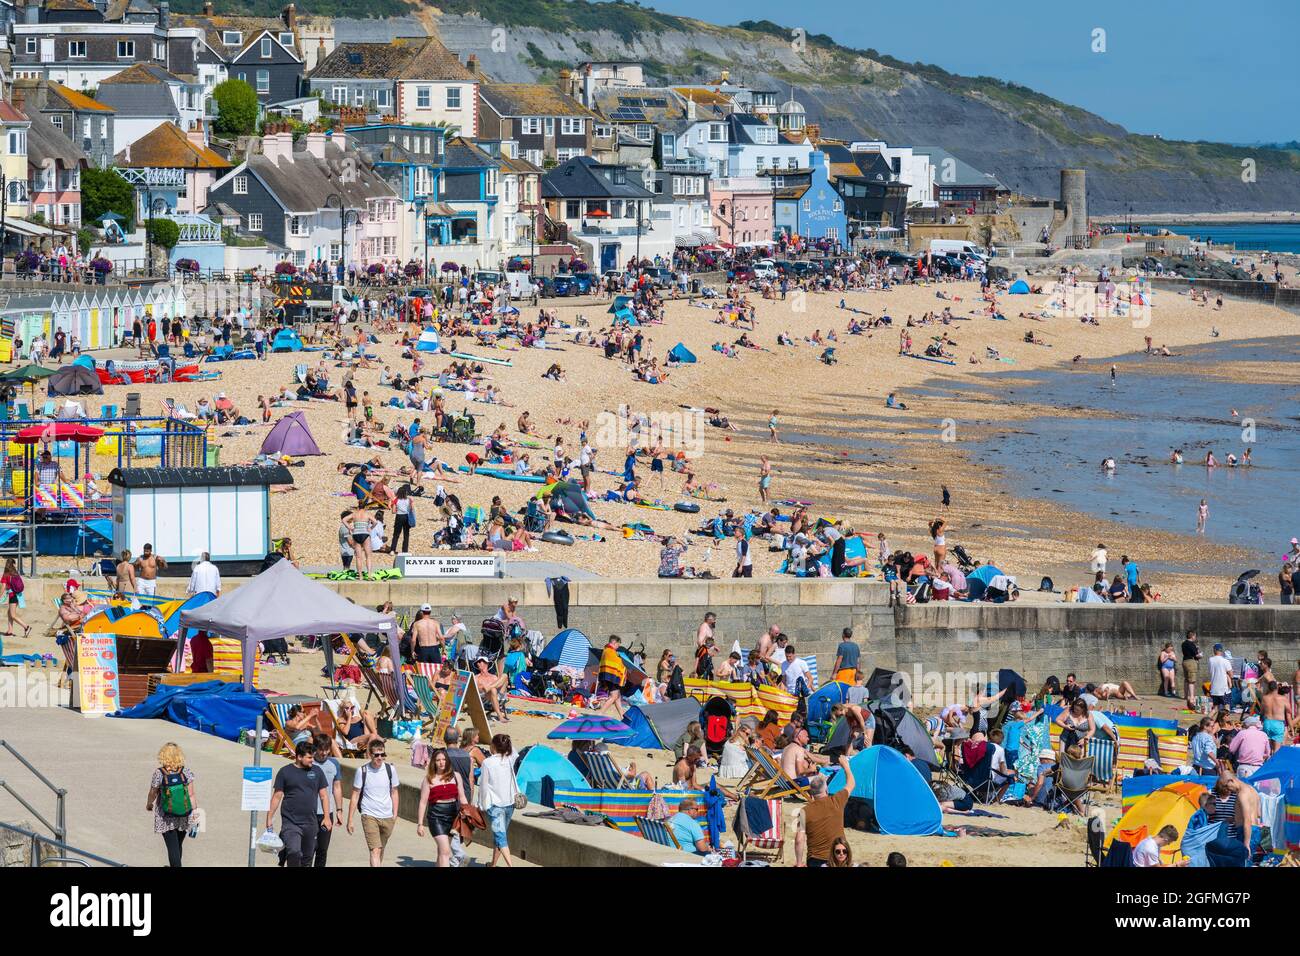 Lyme Regis, Dorset, UK. 26th Aug, 2021. UK Weather: Families and staycationers flock to the beach at the seaside resort of Lyme Regis to soak up the lovely warm sunshine and blue skies. The glorious weather is set to continue into the August Bank Holiday weekend. Credit: Celia McMahon/Alamy Live News Stock Photo